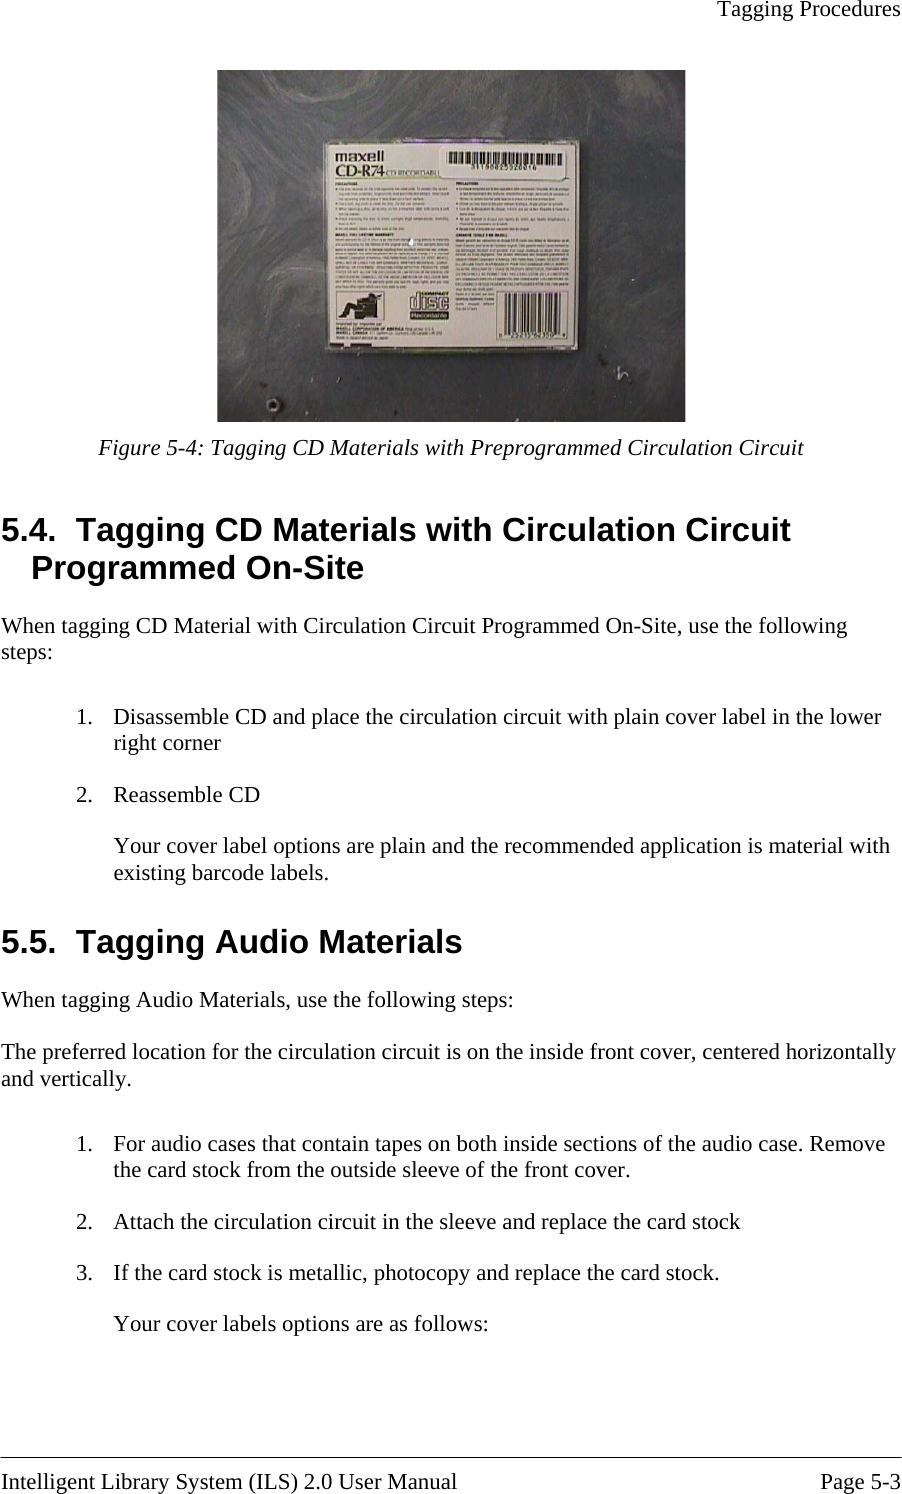   Tagging Procedures   Figure 5-4: Tagging CD Materials with Preprogrammed Circulation Circuit 5.4.  Tagging CD Materials with Circulation Circuit grammed On-Site Prorogrammed On-Site, use the following plain cover label in the lower ial with 5.5.  Tagging Audio Materials When ta The preferre nside front cover, centered horizontally and vertically.  .  For audio cases that contain tapes on both inside sections of the audio case. Remove the card stock from the outside sleeve of the front cover. Attach the circulation circuit in the sleeve and replace the card stock If the card stock is metallic, photocopy and replace the card stock. Your cover labels options are as follows:  When tagging CD Material with Circulation Circuit Psteps:  1.  Disassemble CD and place the circulation circuit with right corner 2. Reassemble CD Your cover label options are plain and the recommended application is materexisting barcode labels. gging Audio Materials, use the following steps: d location for the circulation circuit is on the i12. 3.  Intelligent Library System (ILS) 2.0 User Manual  Page 5-3 